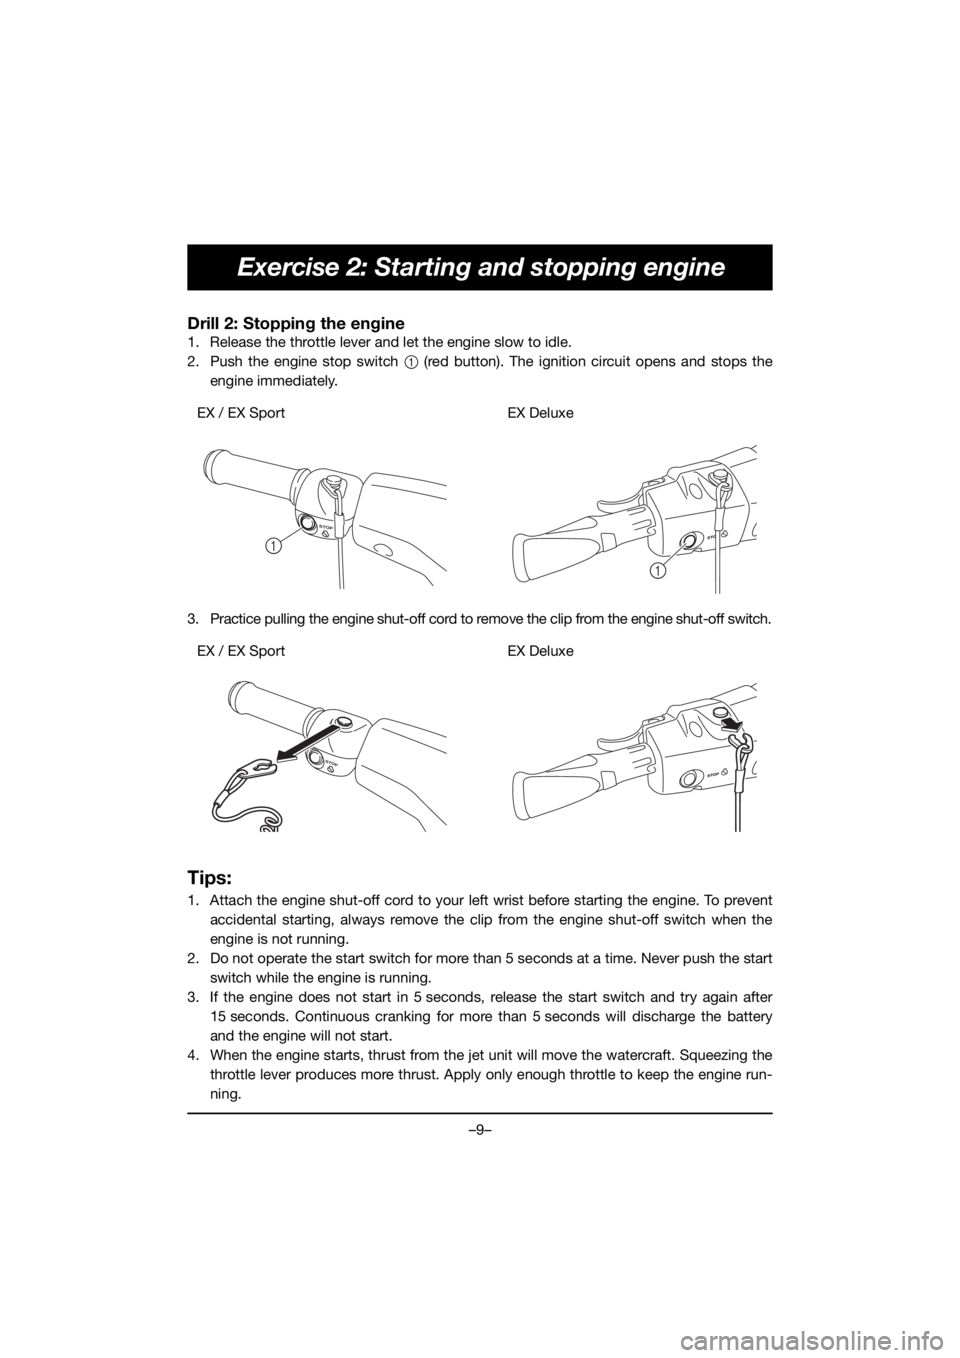 YAMAHA EX 2019  Manual de utilização (in Portuguese) –9–
Exercise 2: Starting and stopping engine
Drill 2: Stopping the engine
1. Release the throttle lever and let the engine slow to idle.
2. Push the engine stop switch 1 (red button). The ignition